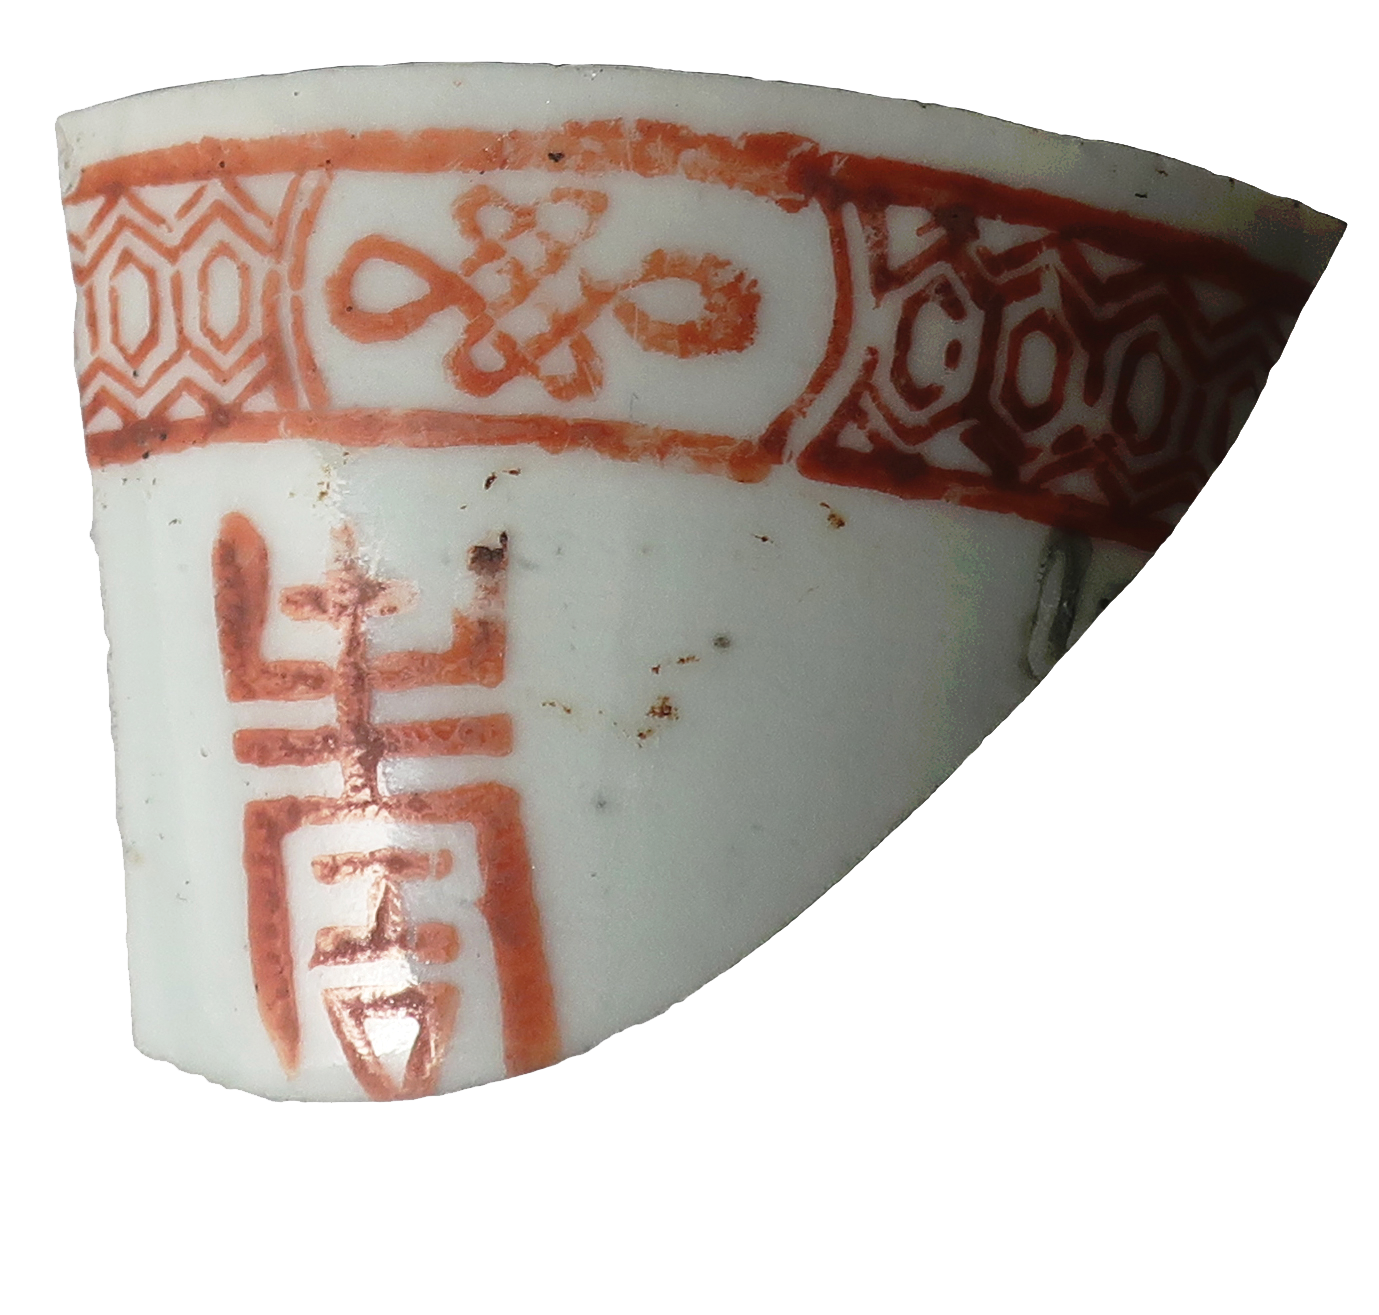 Broken teacup with red Chinese-style design